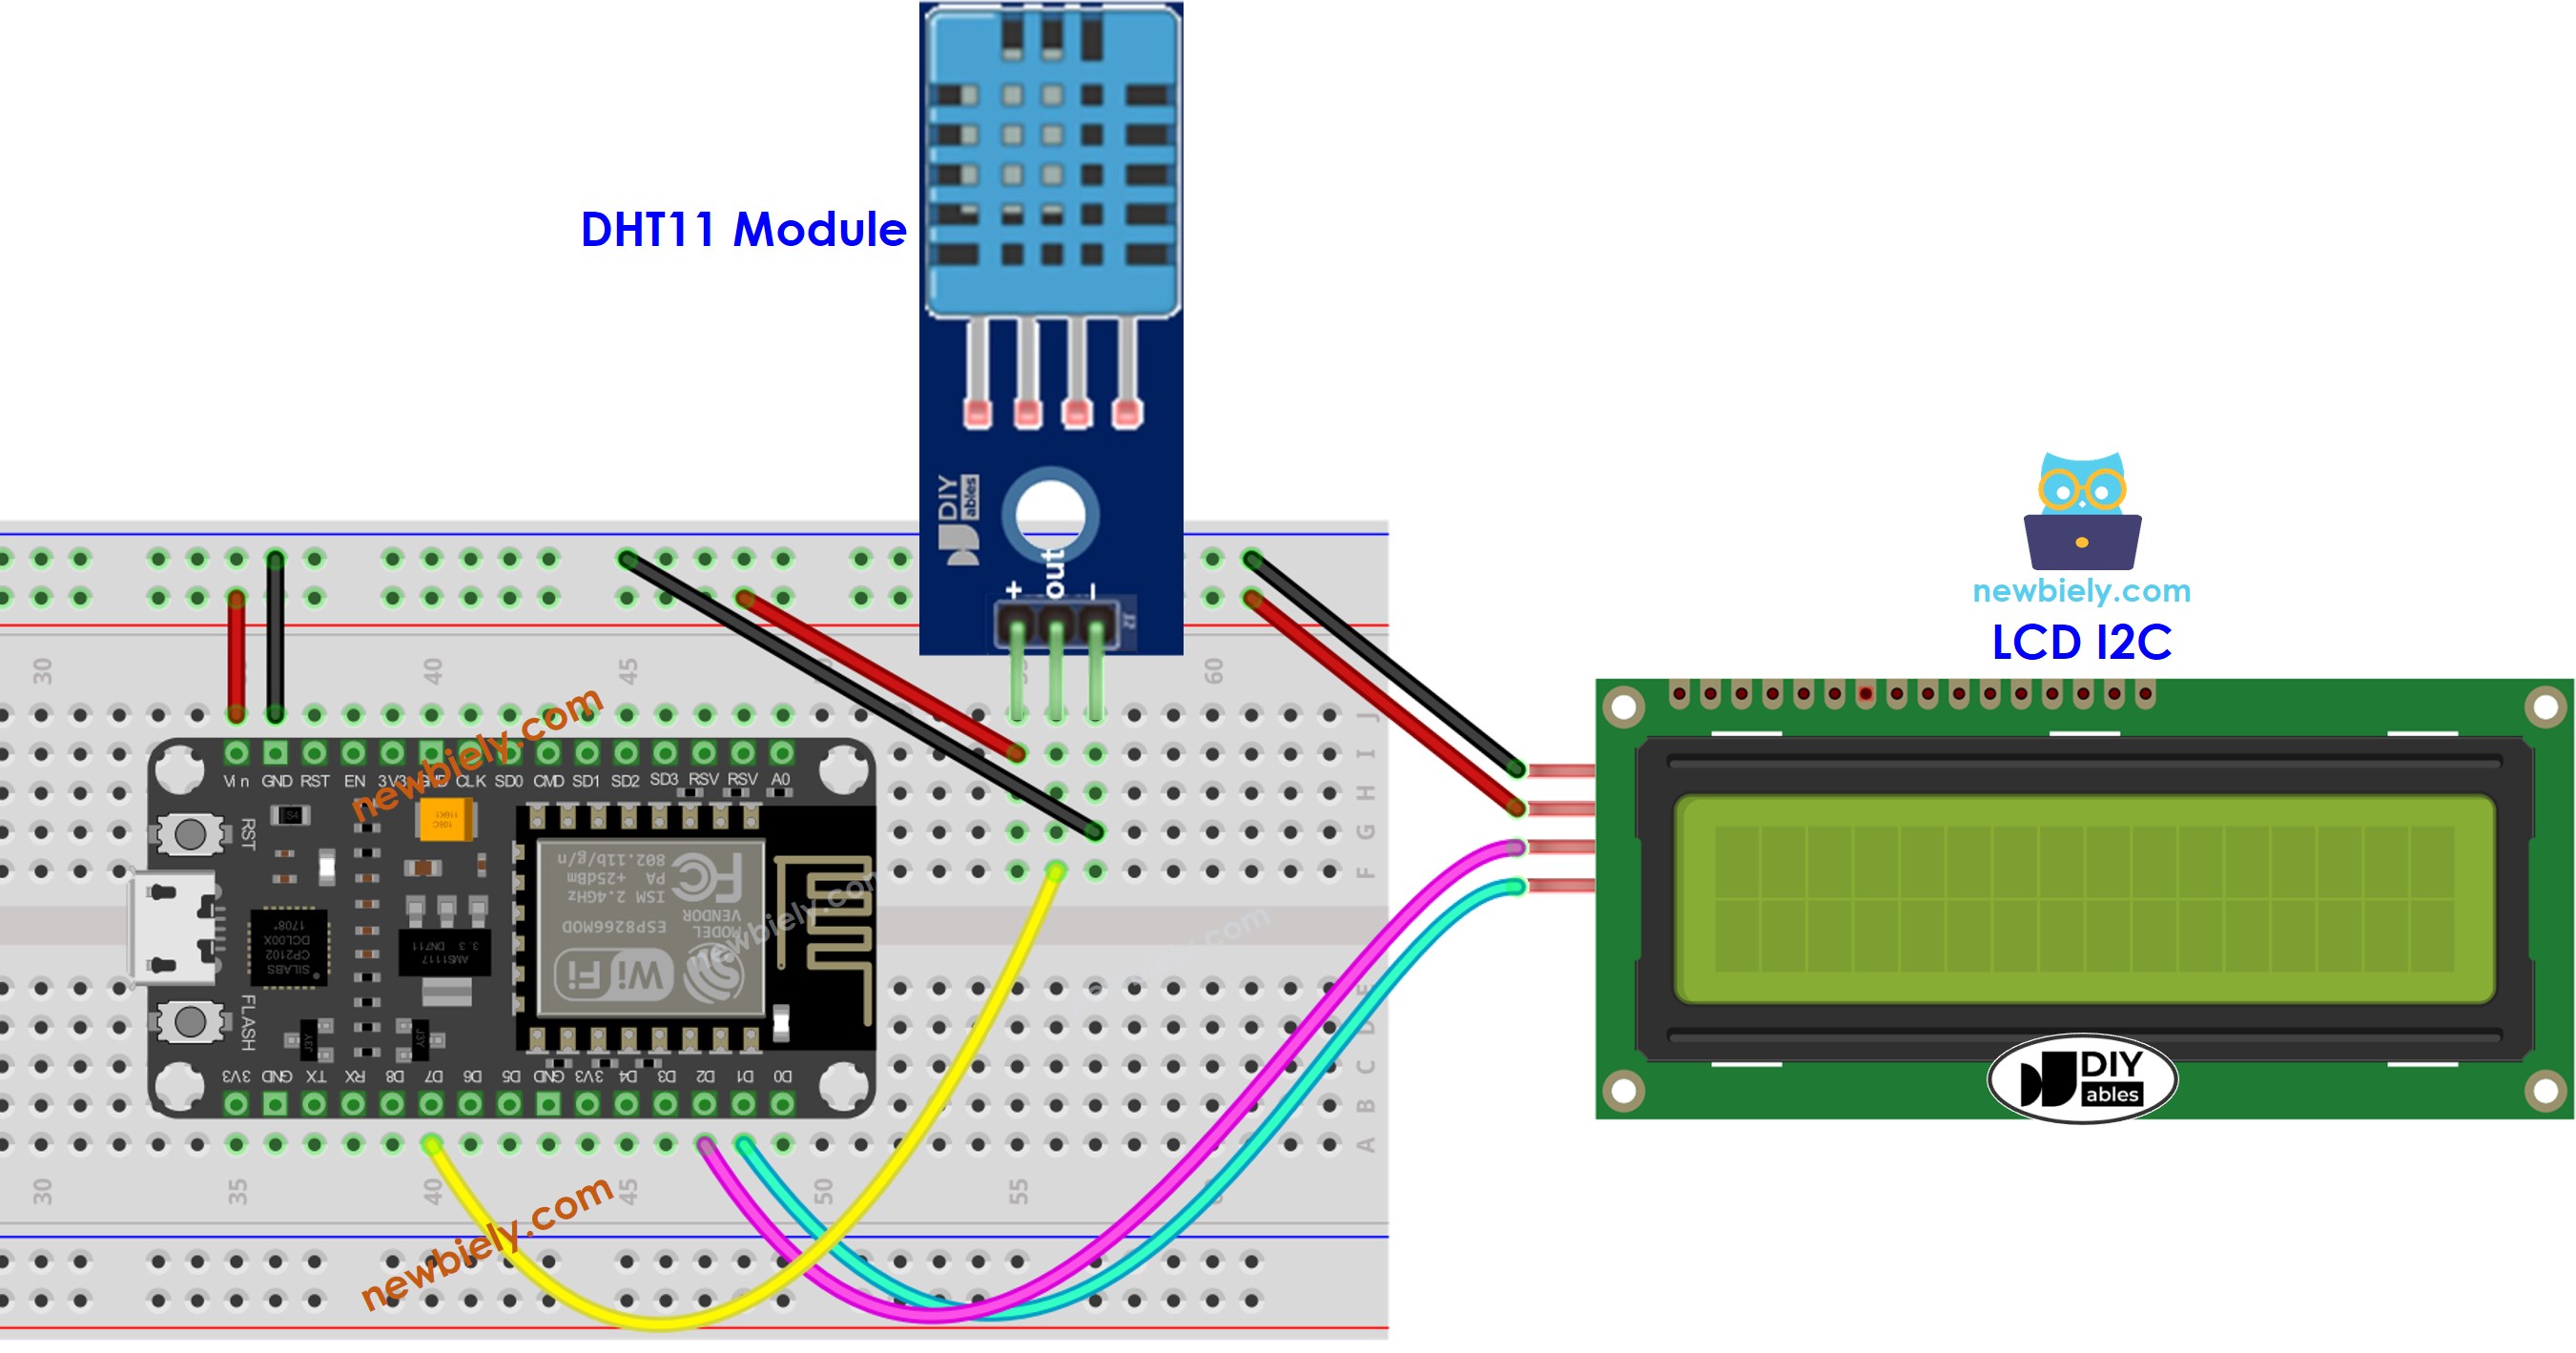 The wiring diagram between ESP8266 NodeMCU and DHT11 temperature and humidity LCD